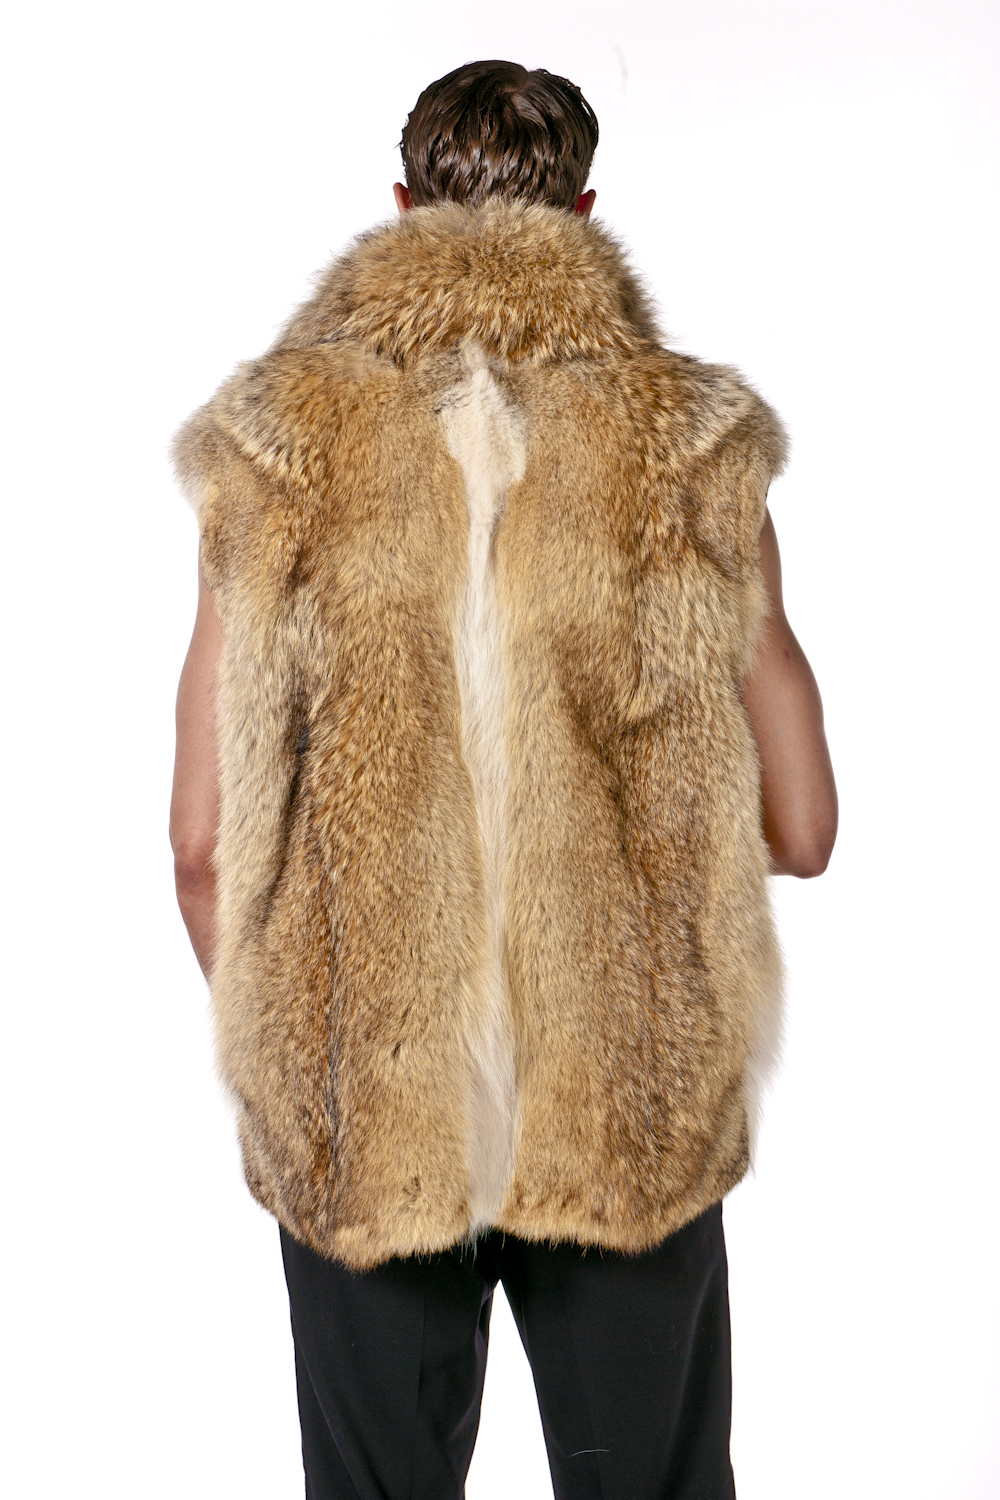 Coyote Mens Zippered Vest Natural Coyote Vest Madison Avenue Mall Furs